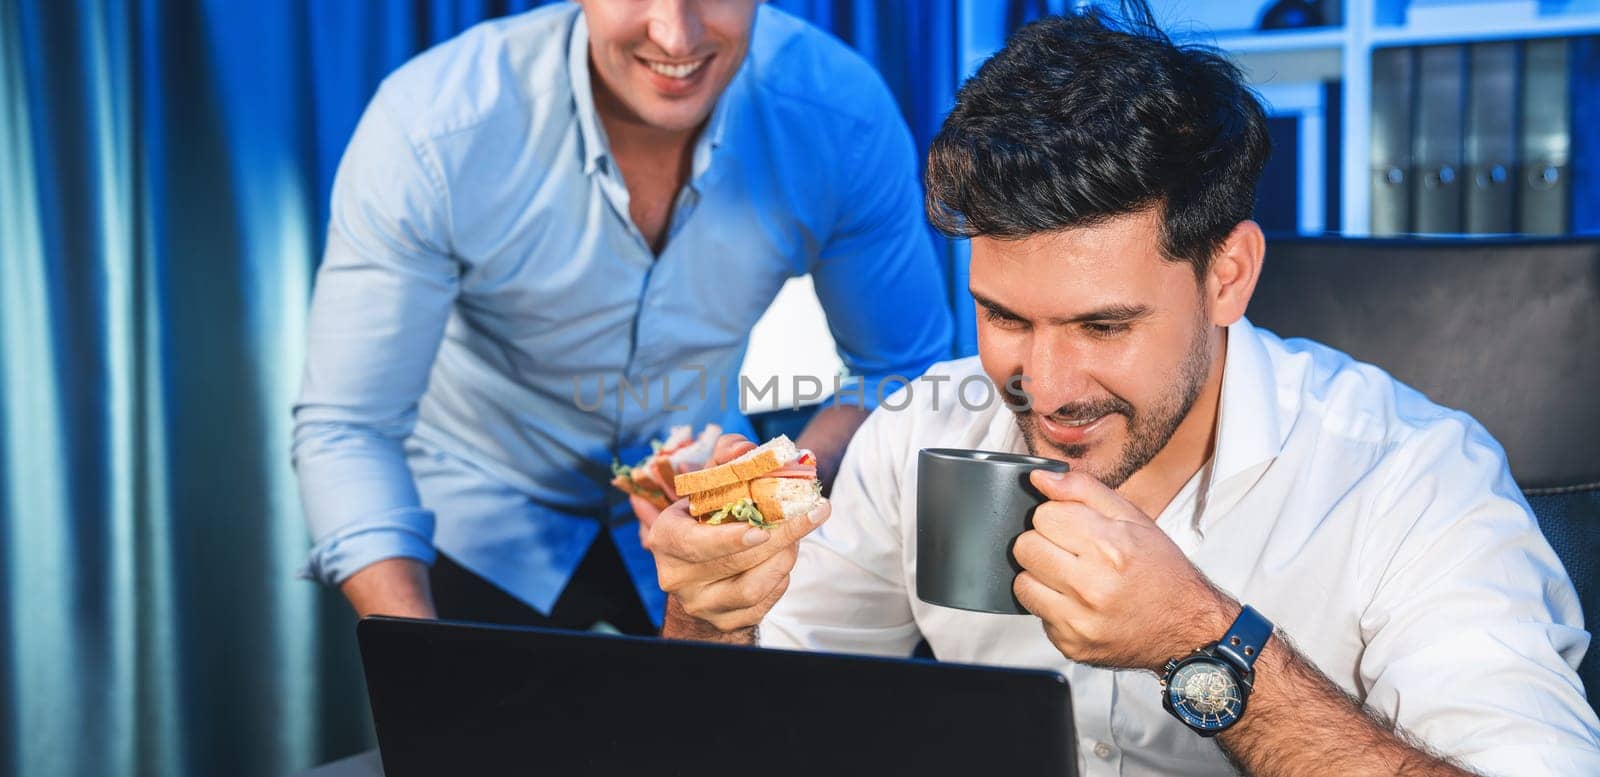 Business partners with happy smiling face sharing delicious sandwich dish with friend at night time. Hungry creative colleagues enjoy eating fast food at workplace with neon blue light. Sellable.